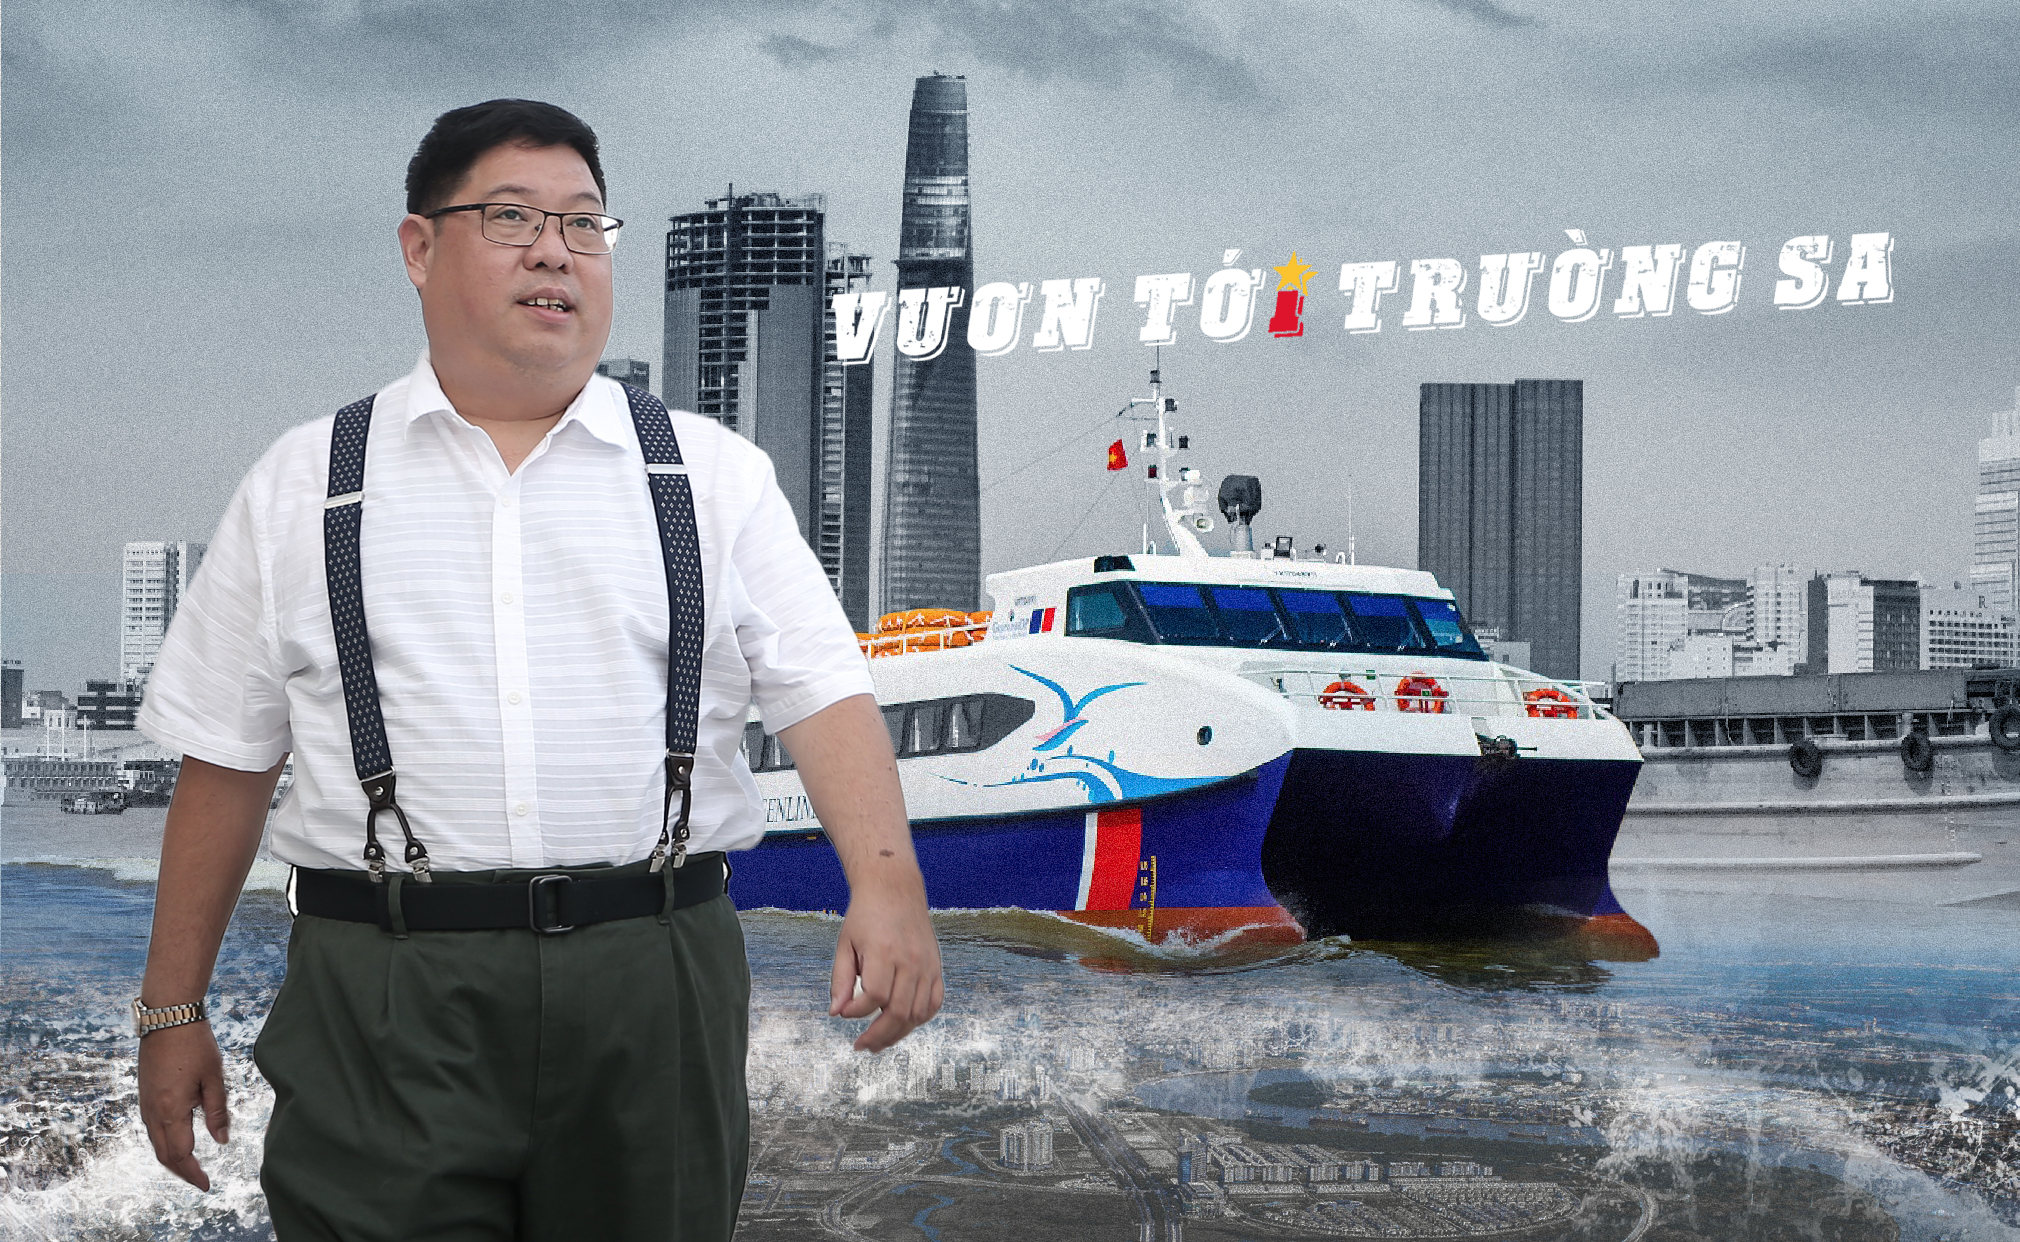 Speedboat businessman with aspiration to reach Truong Sa - Photo 5.